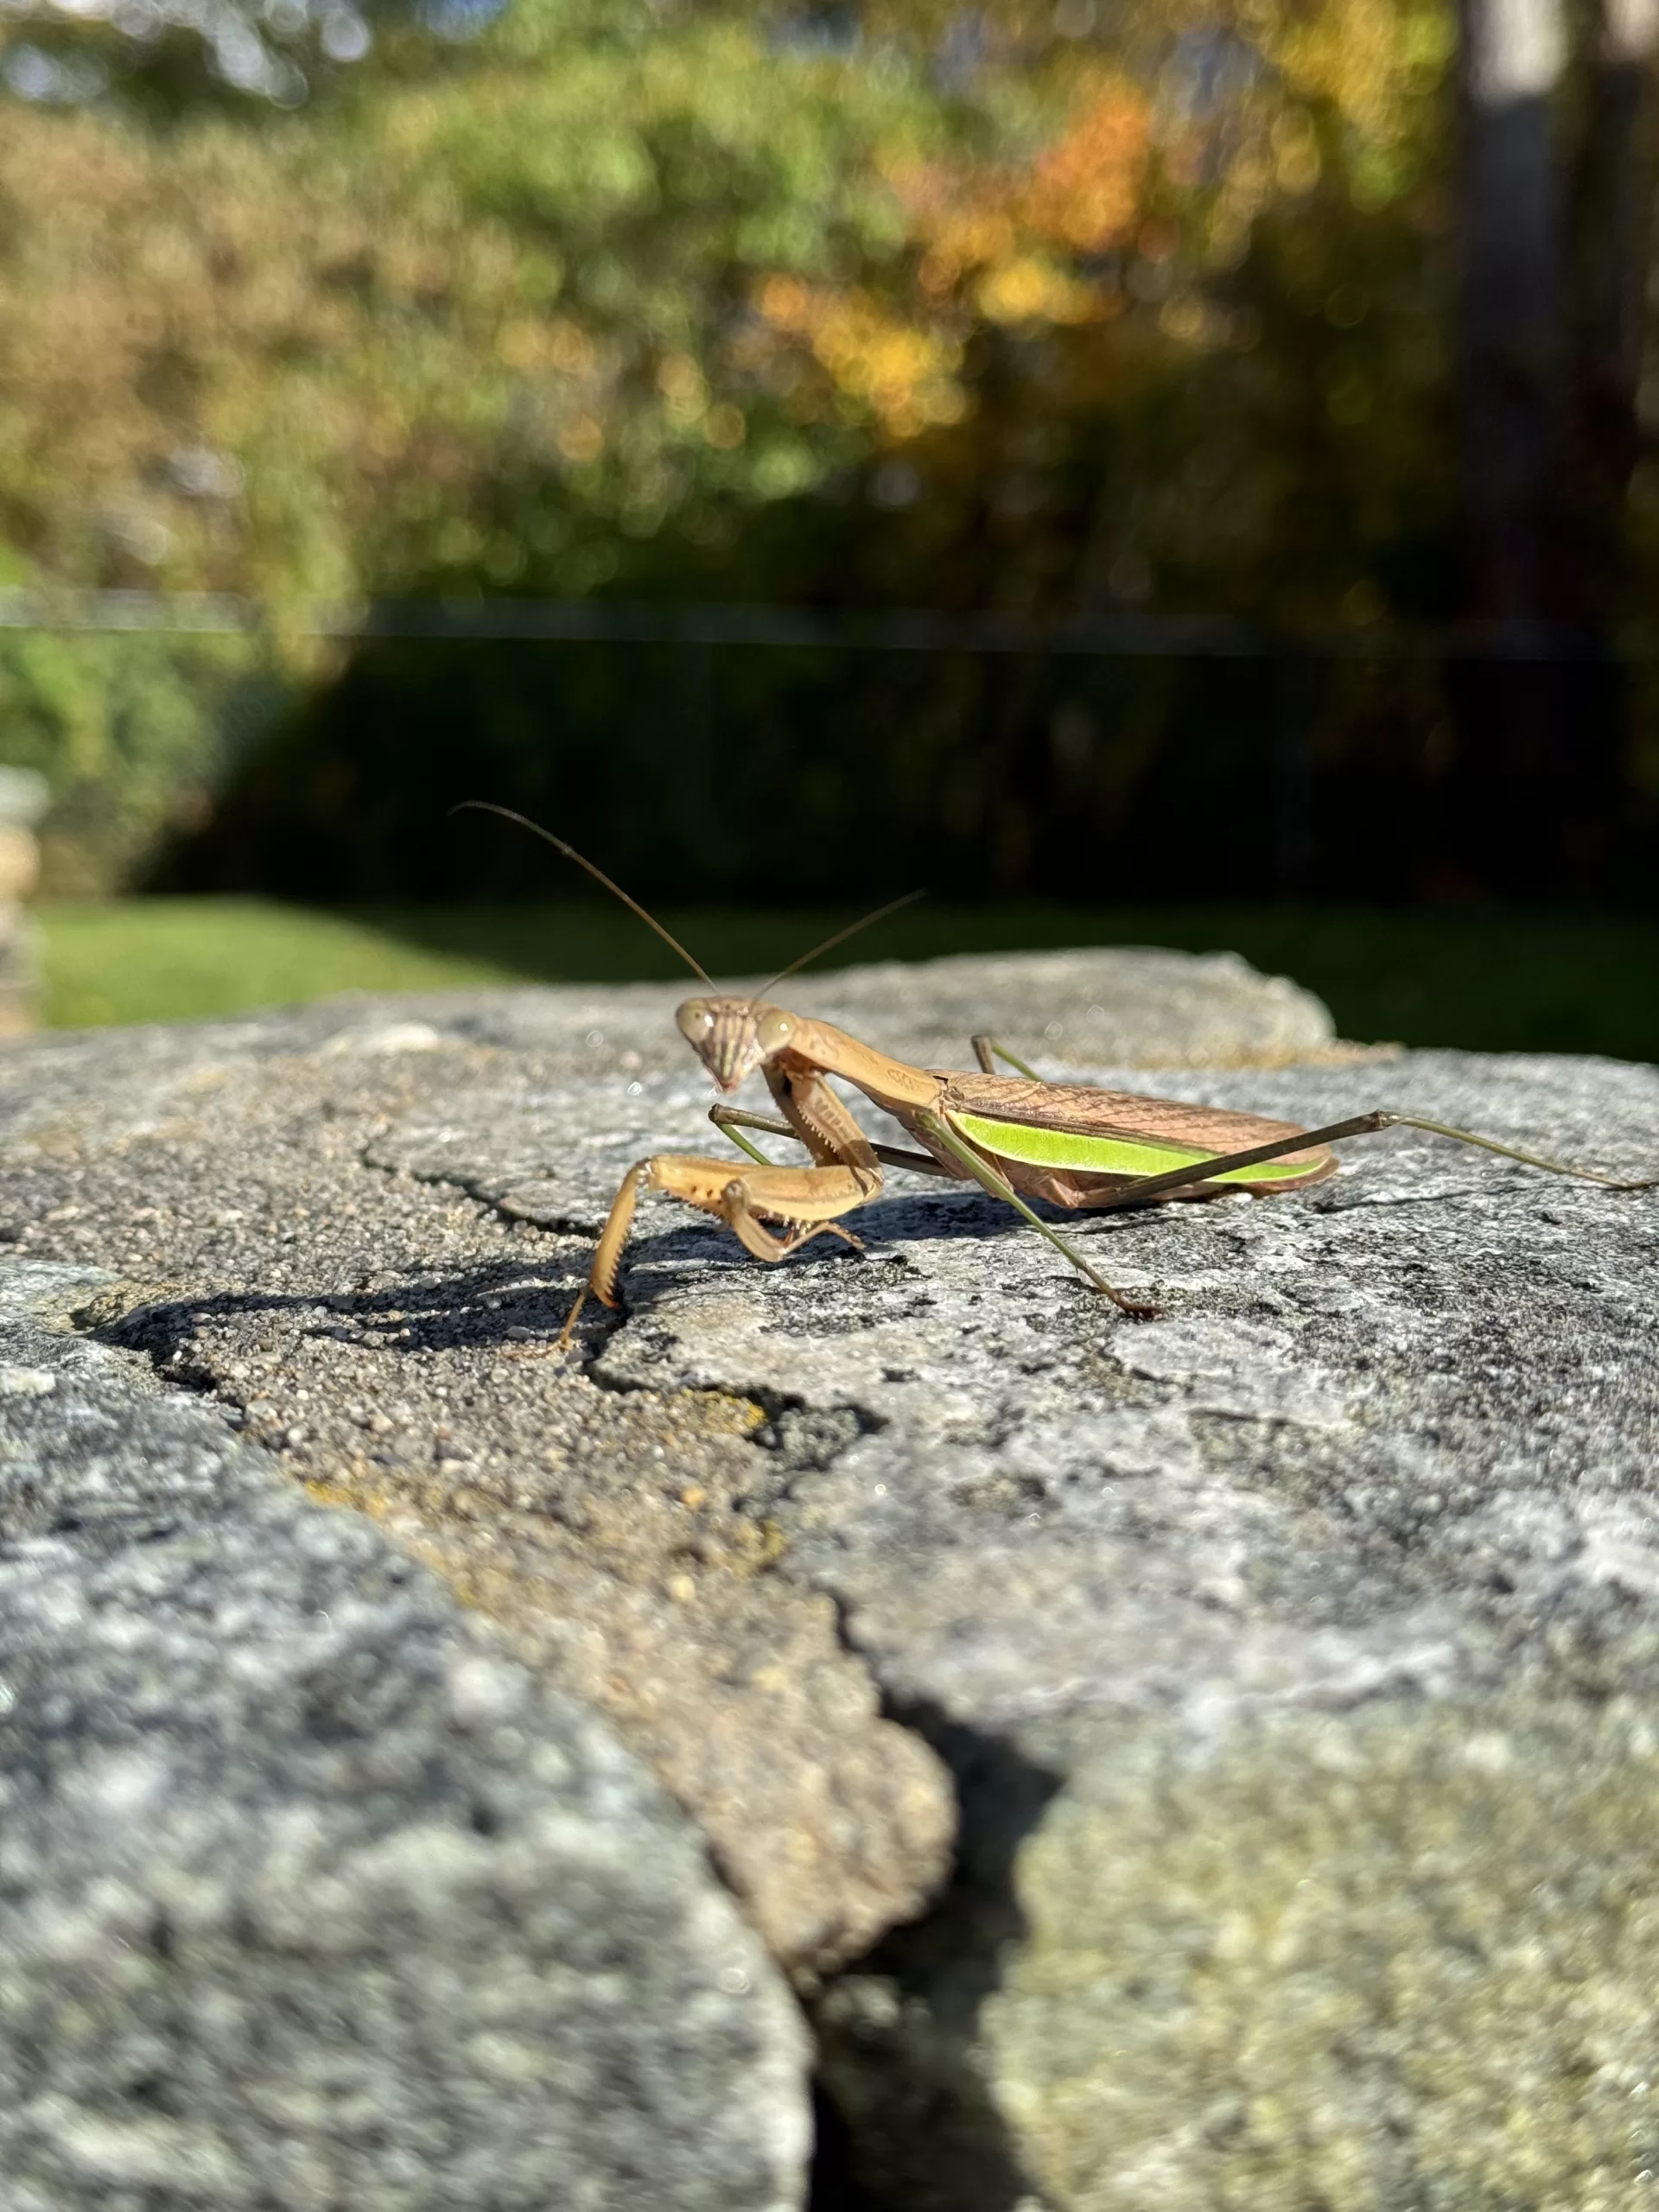 A brown praying mantis with a green stripe on its body sitting on a stone wall looking towards the camera. The green stripe is in focus, and its face is slightly out of focus.